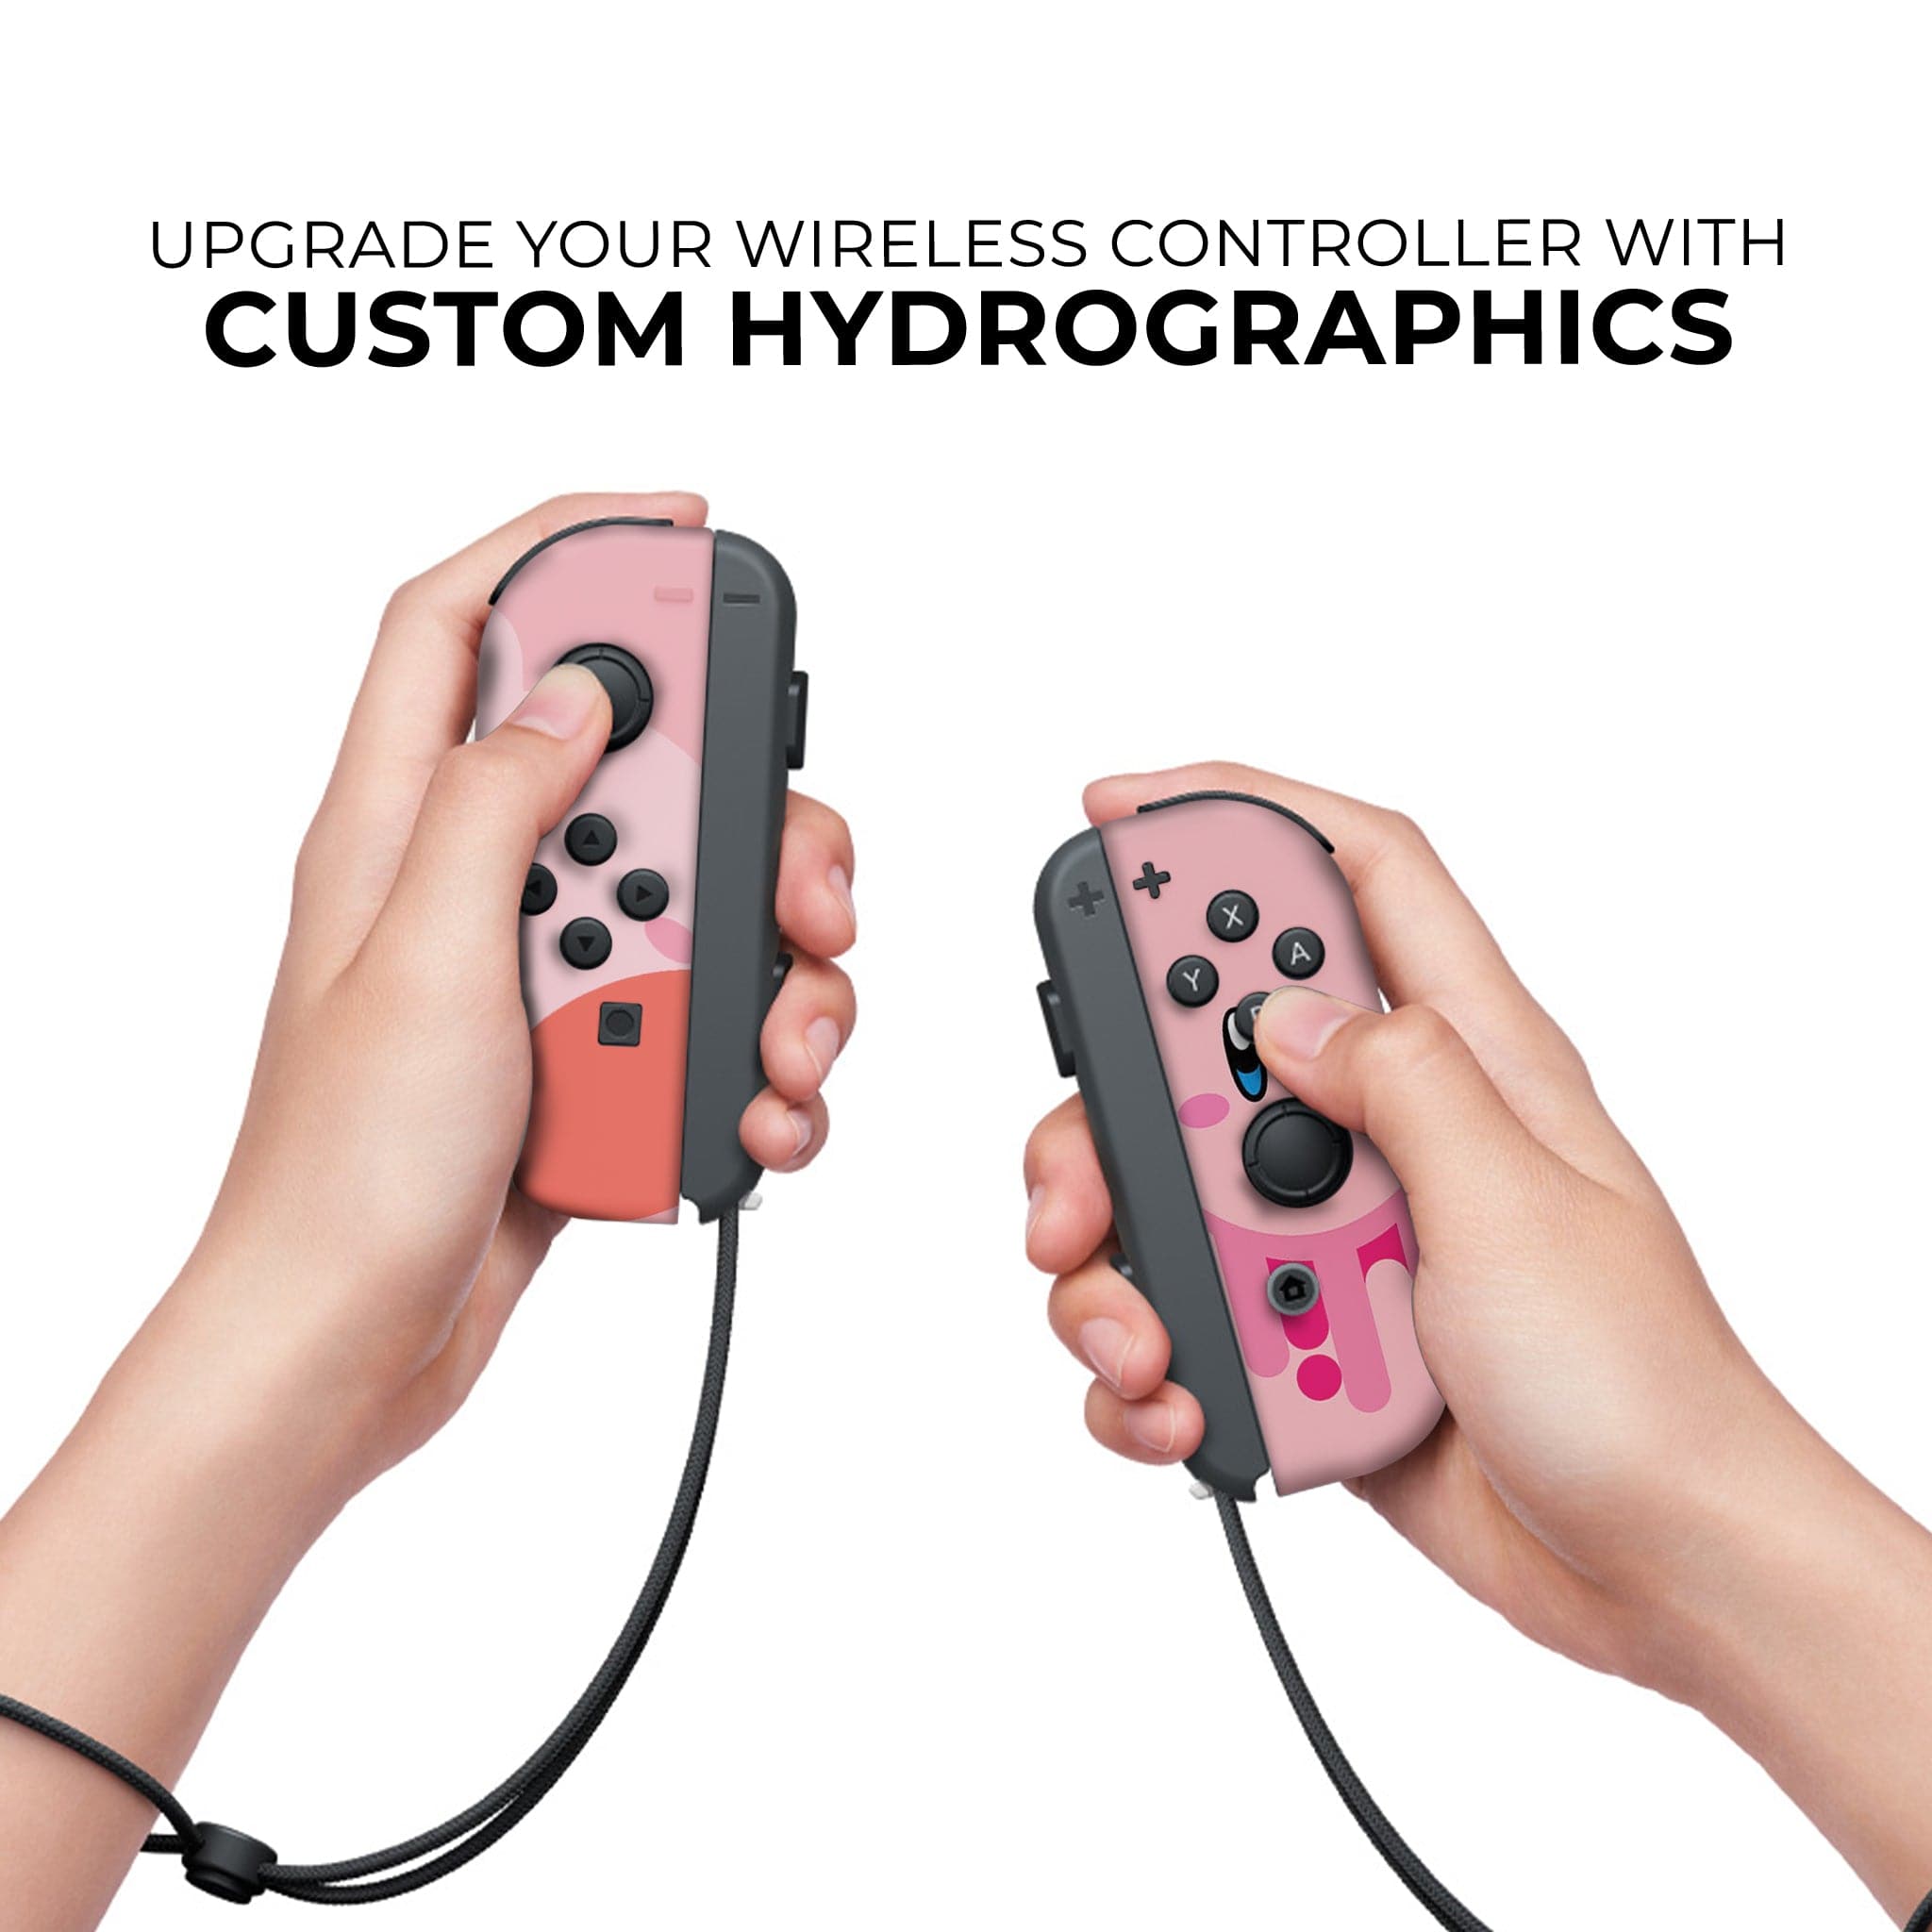 Kirby Inspired Nintendo Switch Controllers